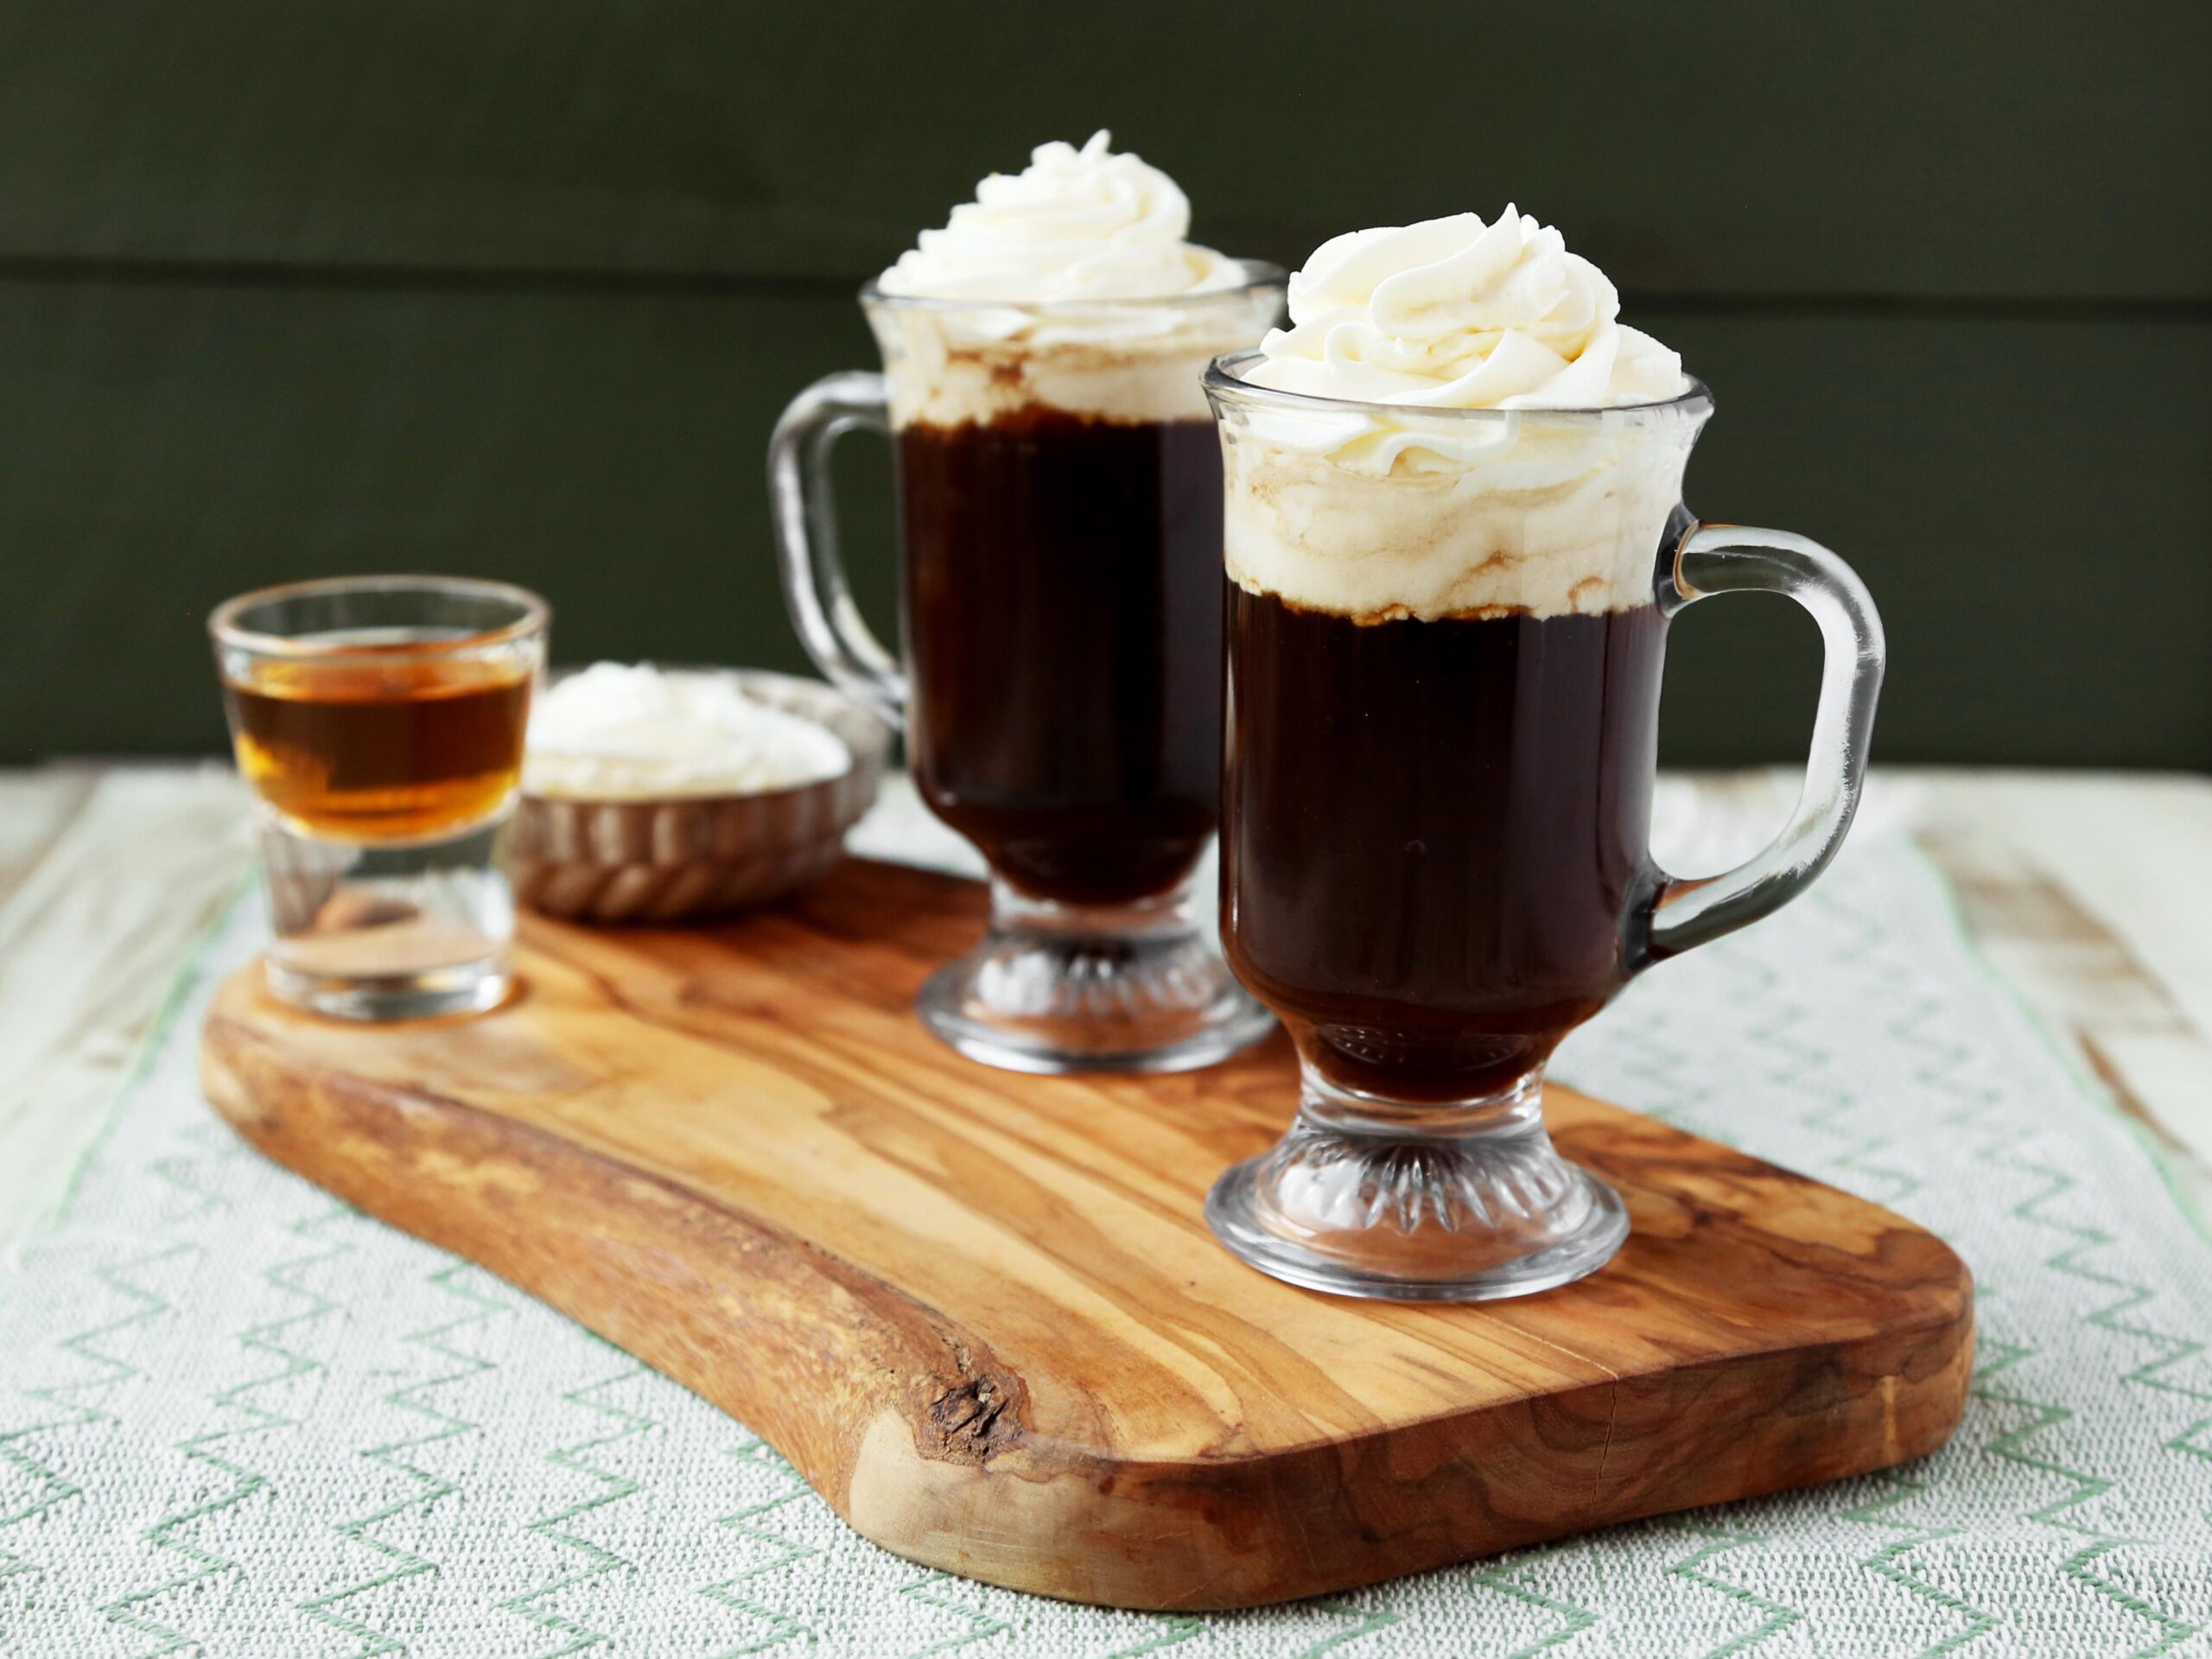  Warm your soul this St. Patrick's Day with The Toronto Star's Irish Coffee!